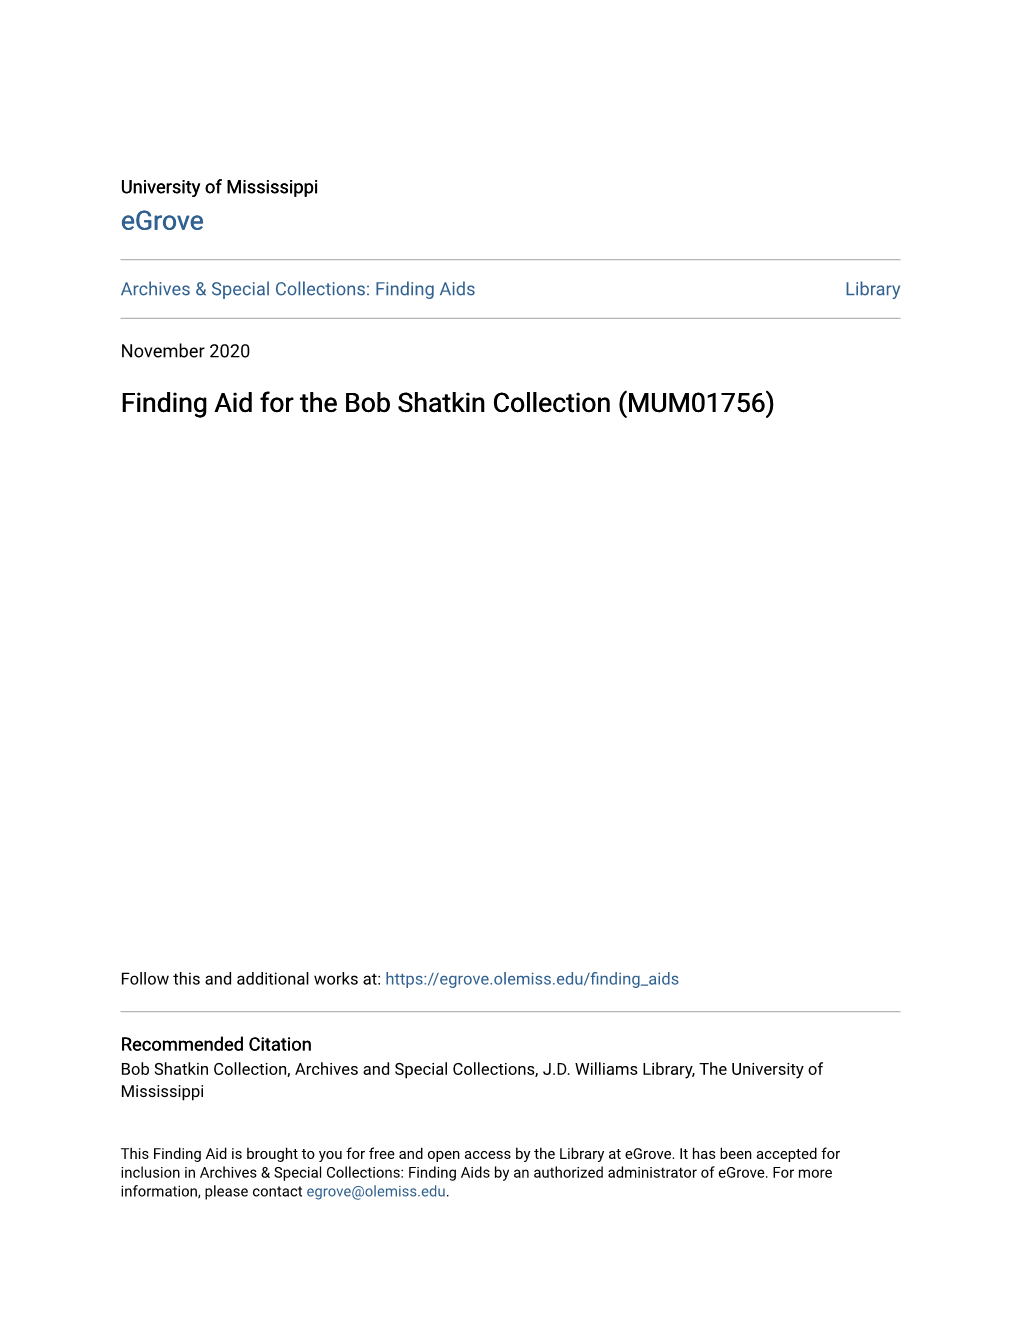 Finding Aid for the Bob Shatkin Collection (MUM01756)